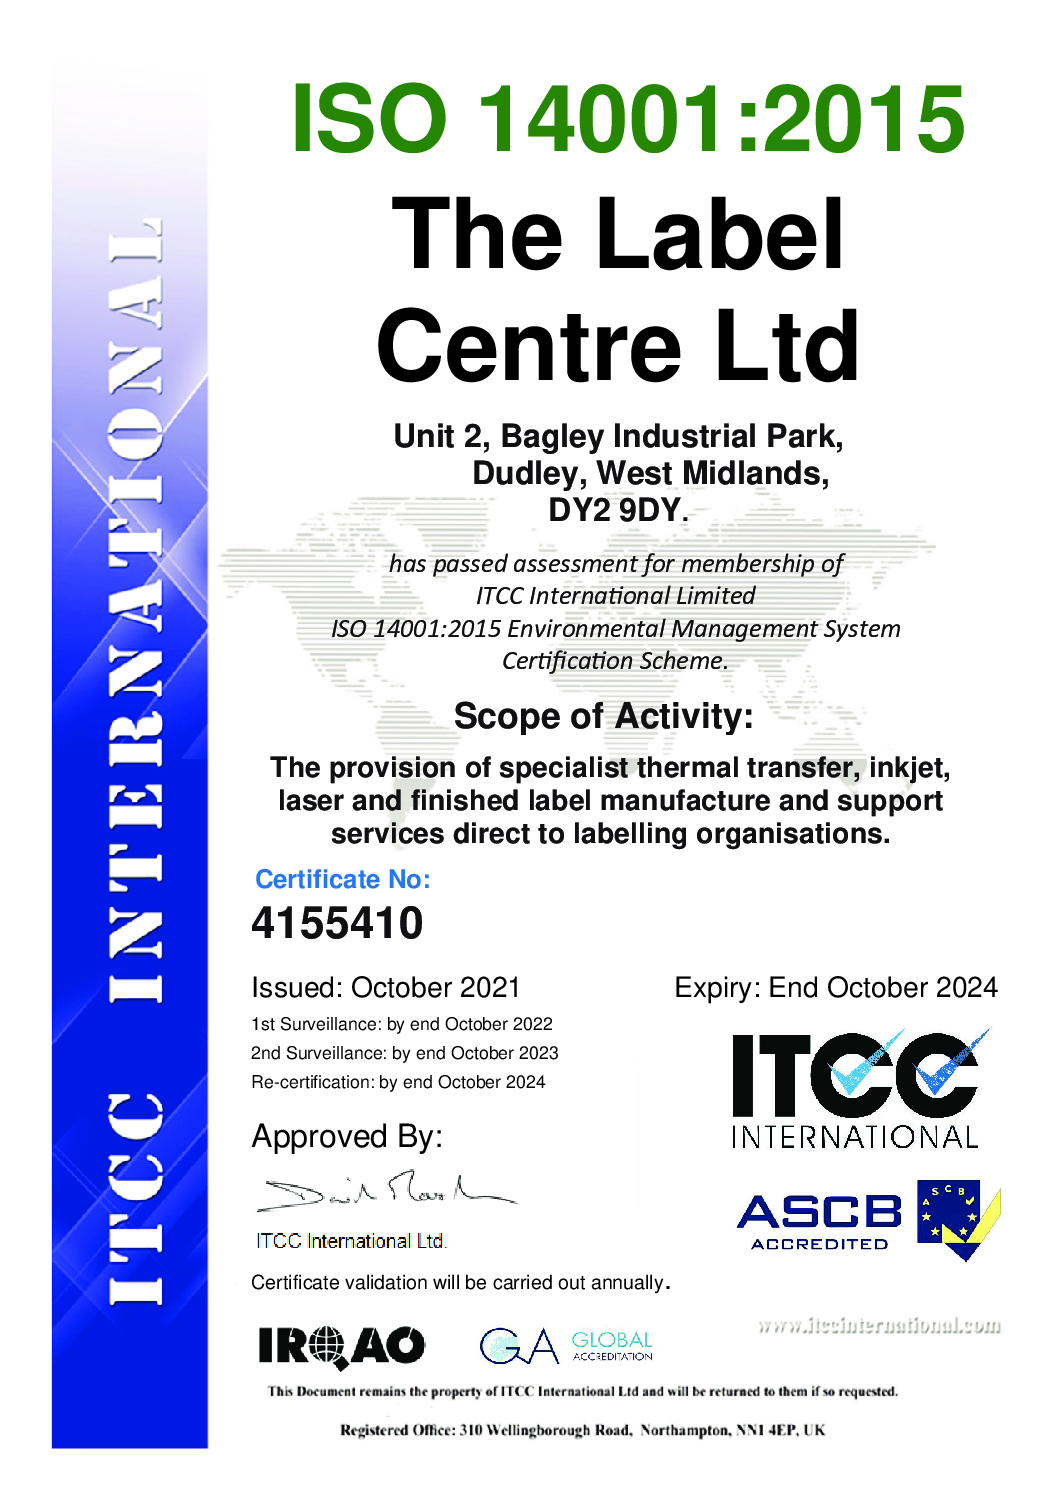 ISO 14001 2015 Environmental Management Certification